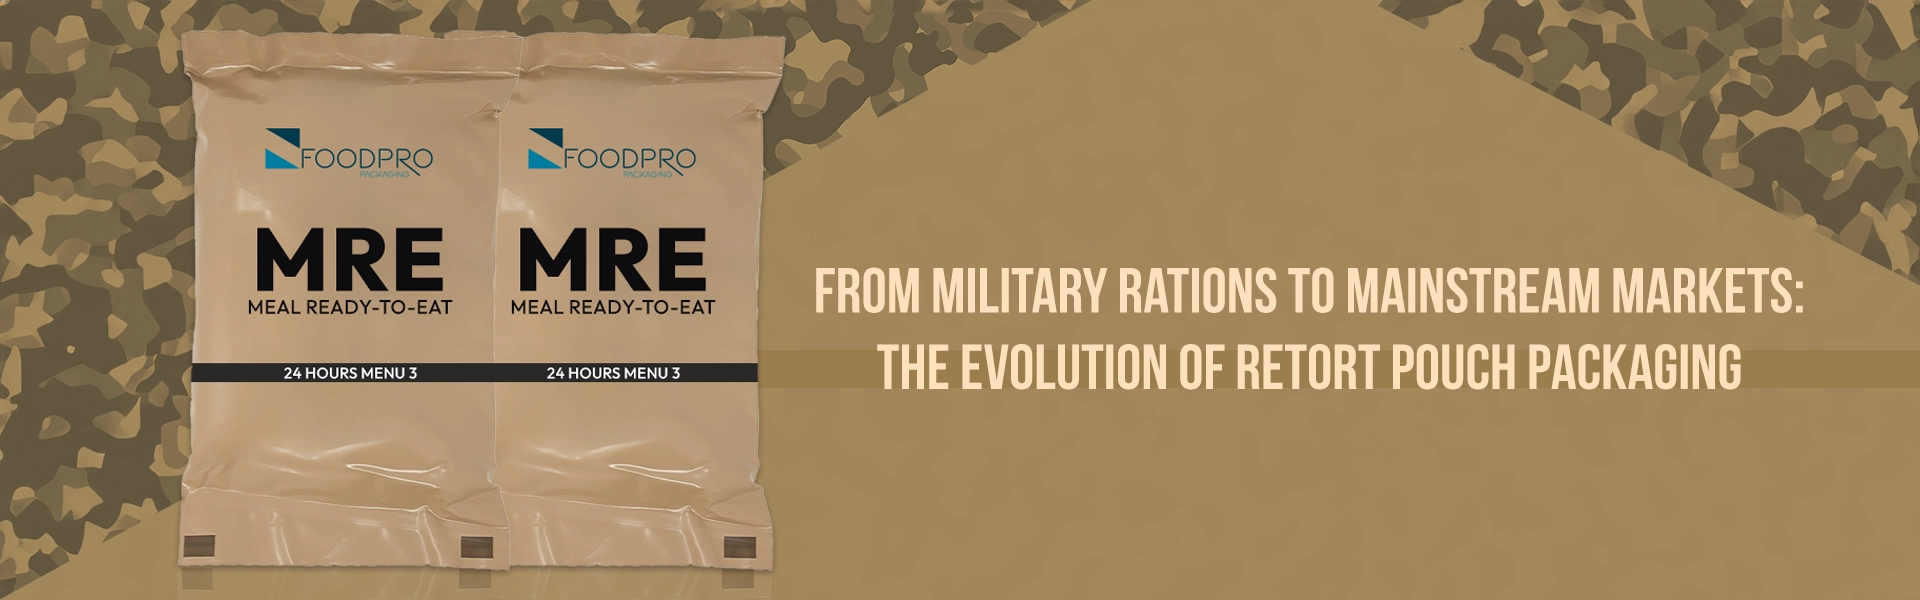 From Military Rations to Mainstream Markets: The Evolution of Retort Pouch Packaging